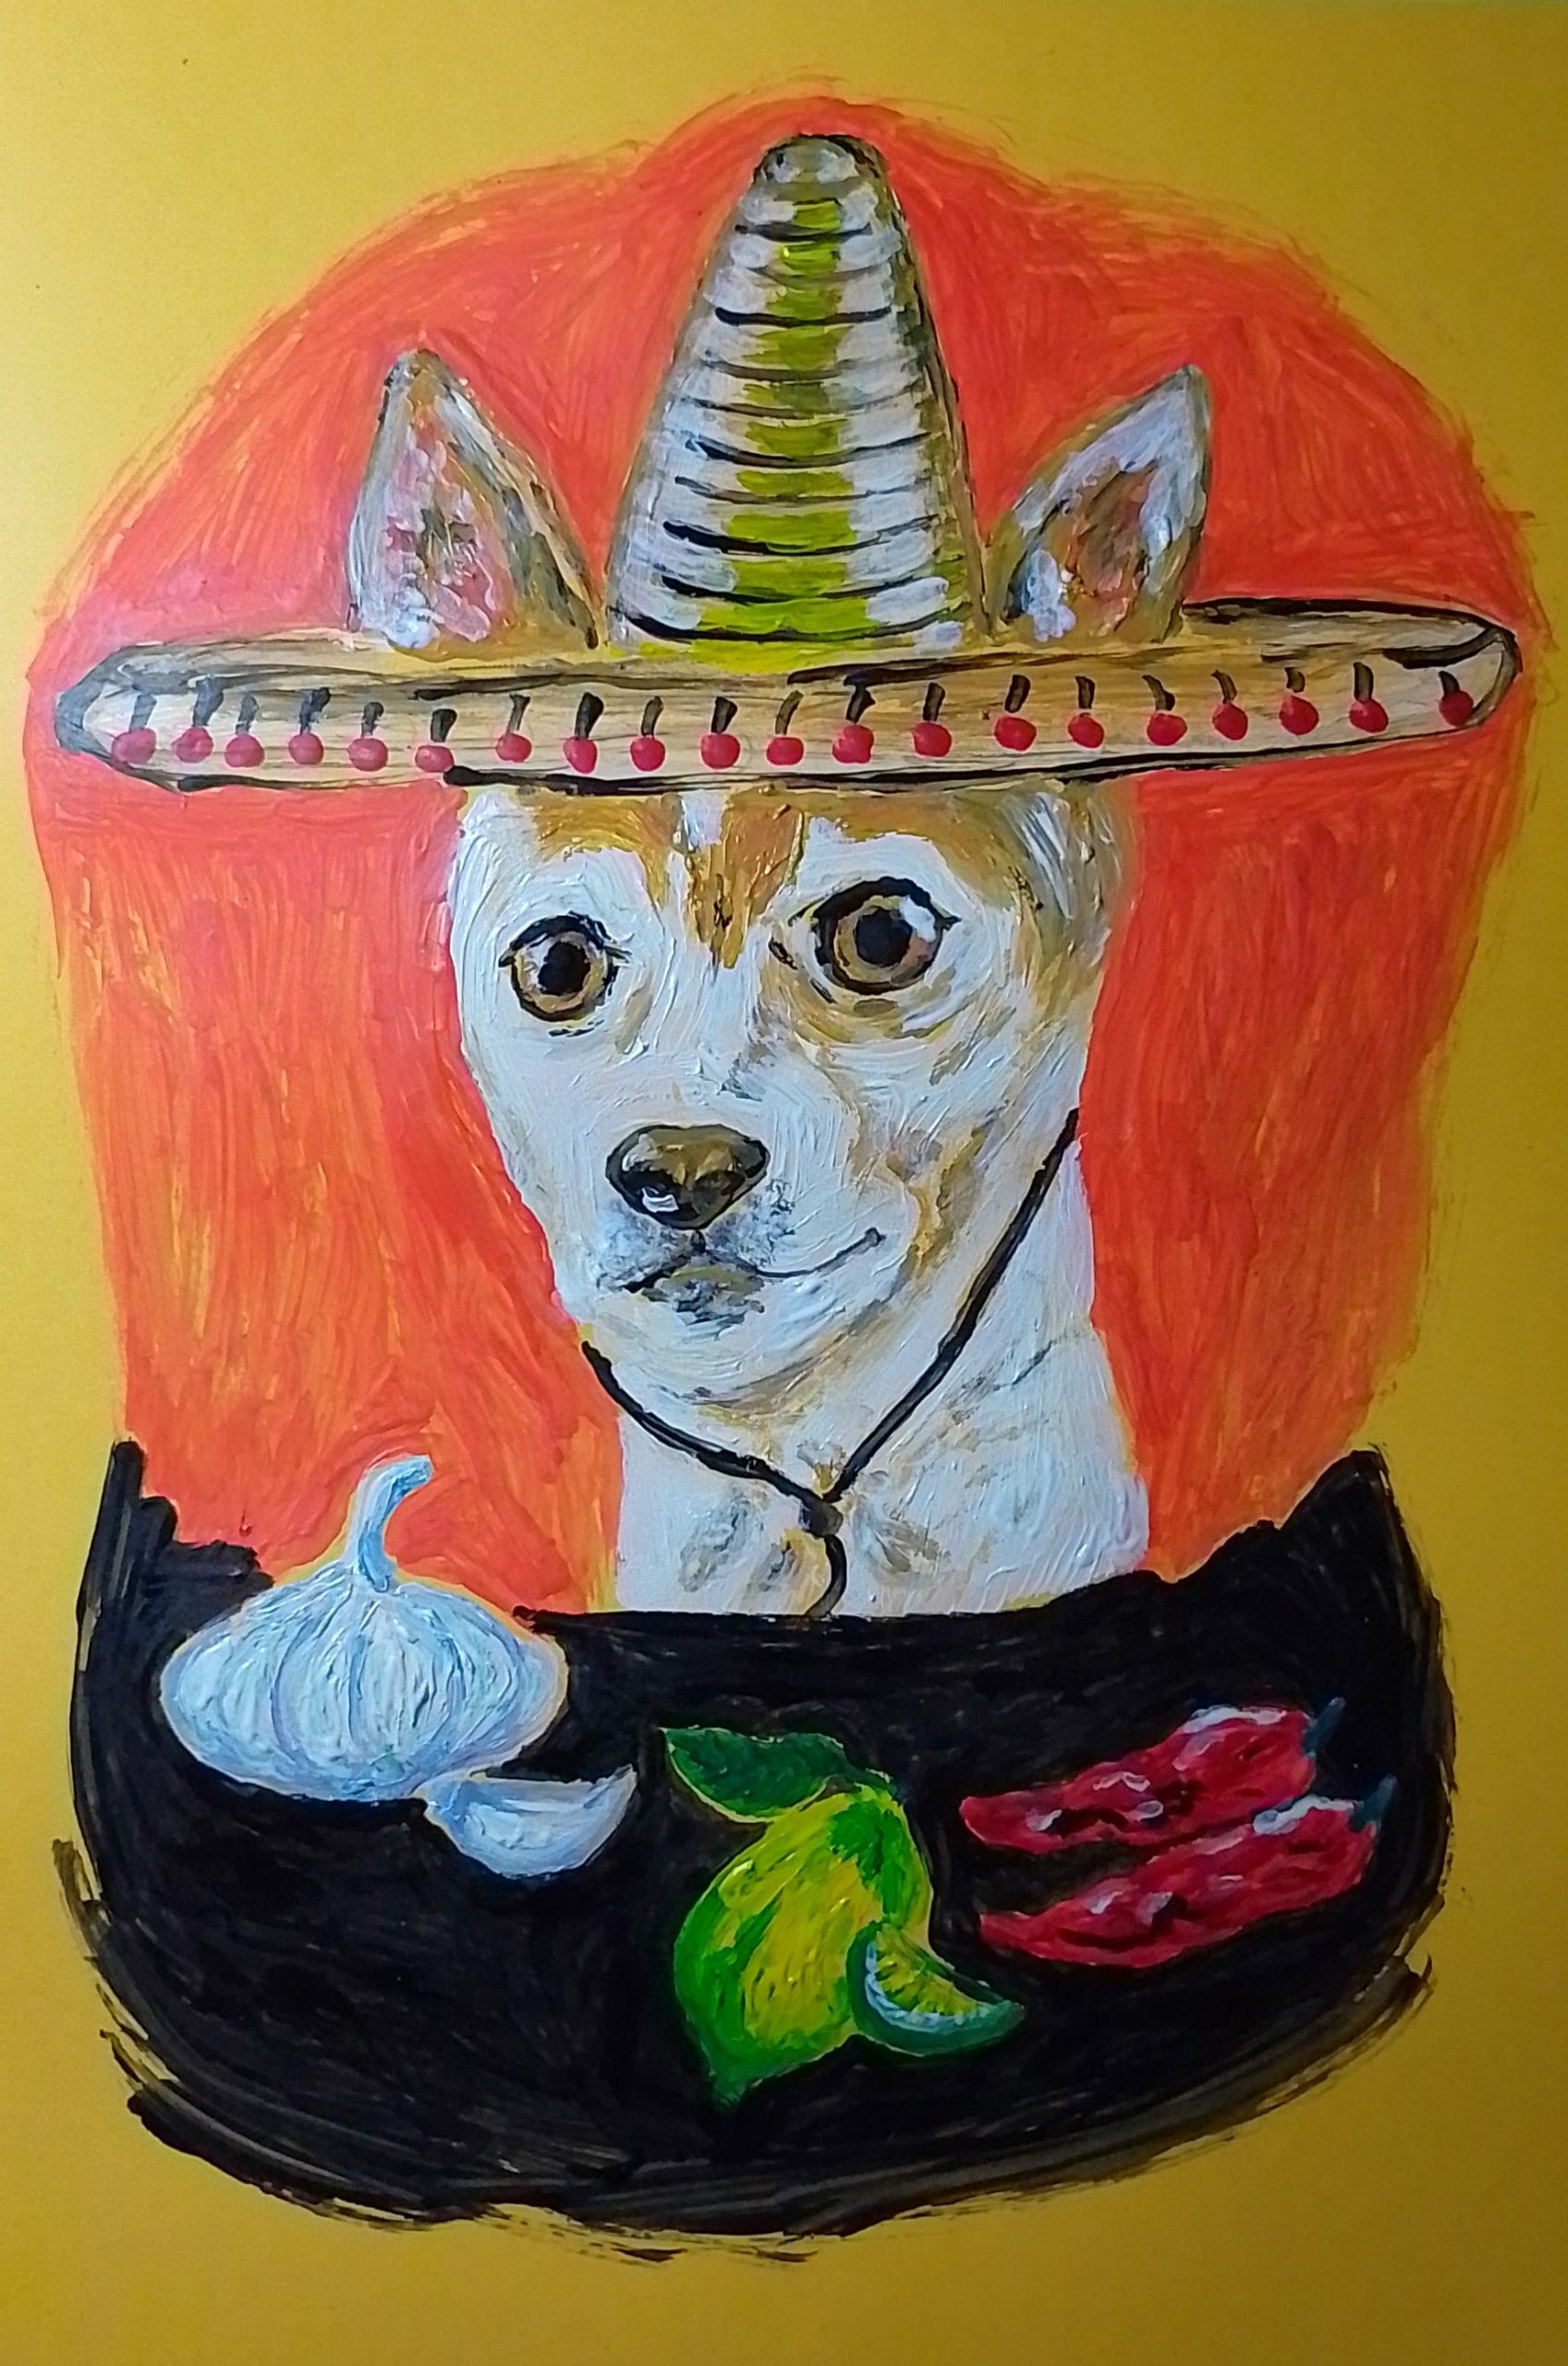 dog language image of dog wearing Mexican sombrero painting by Paola Bassanese